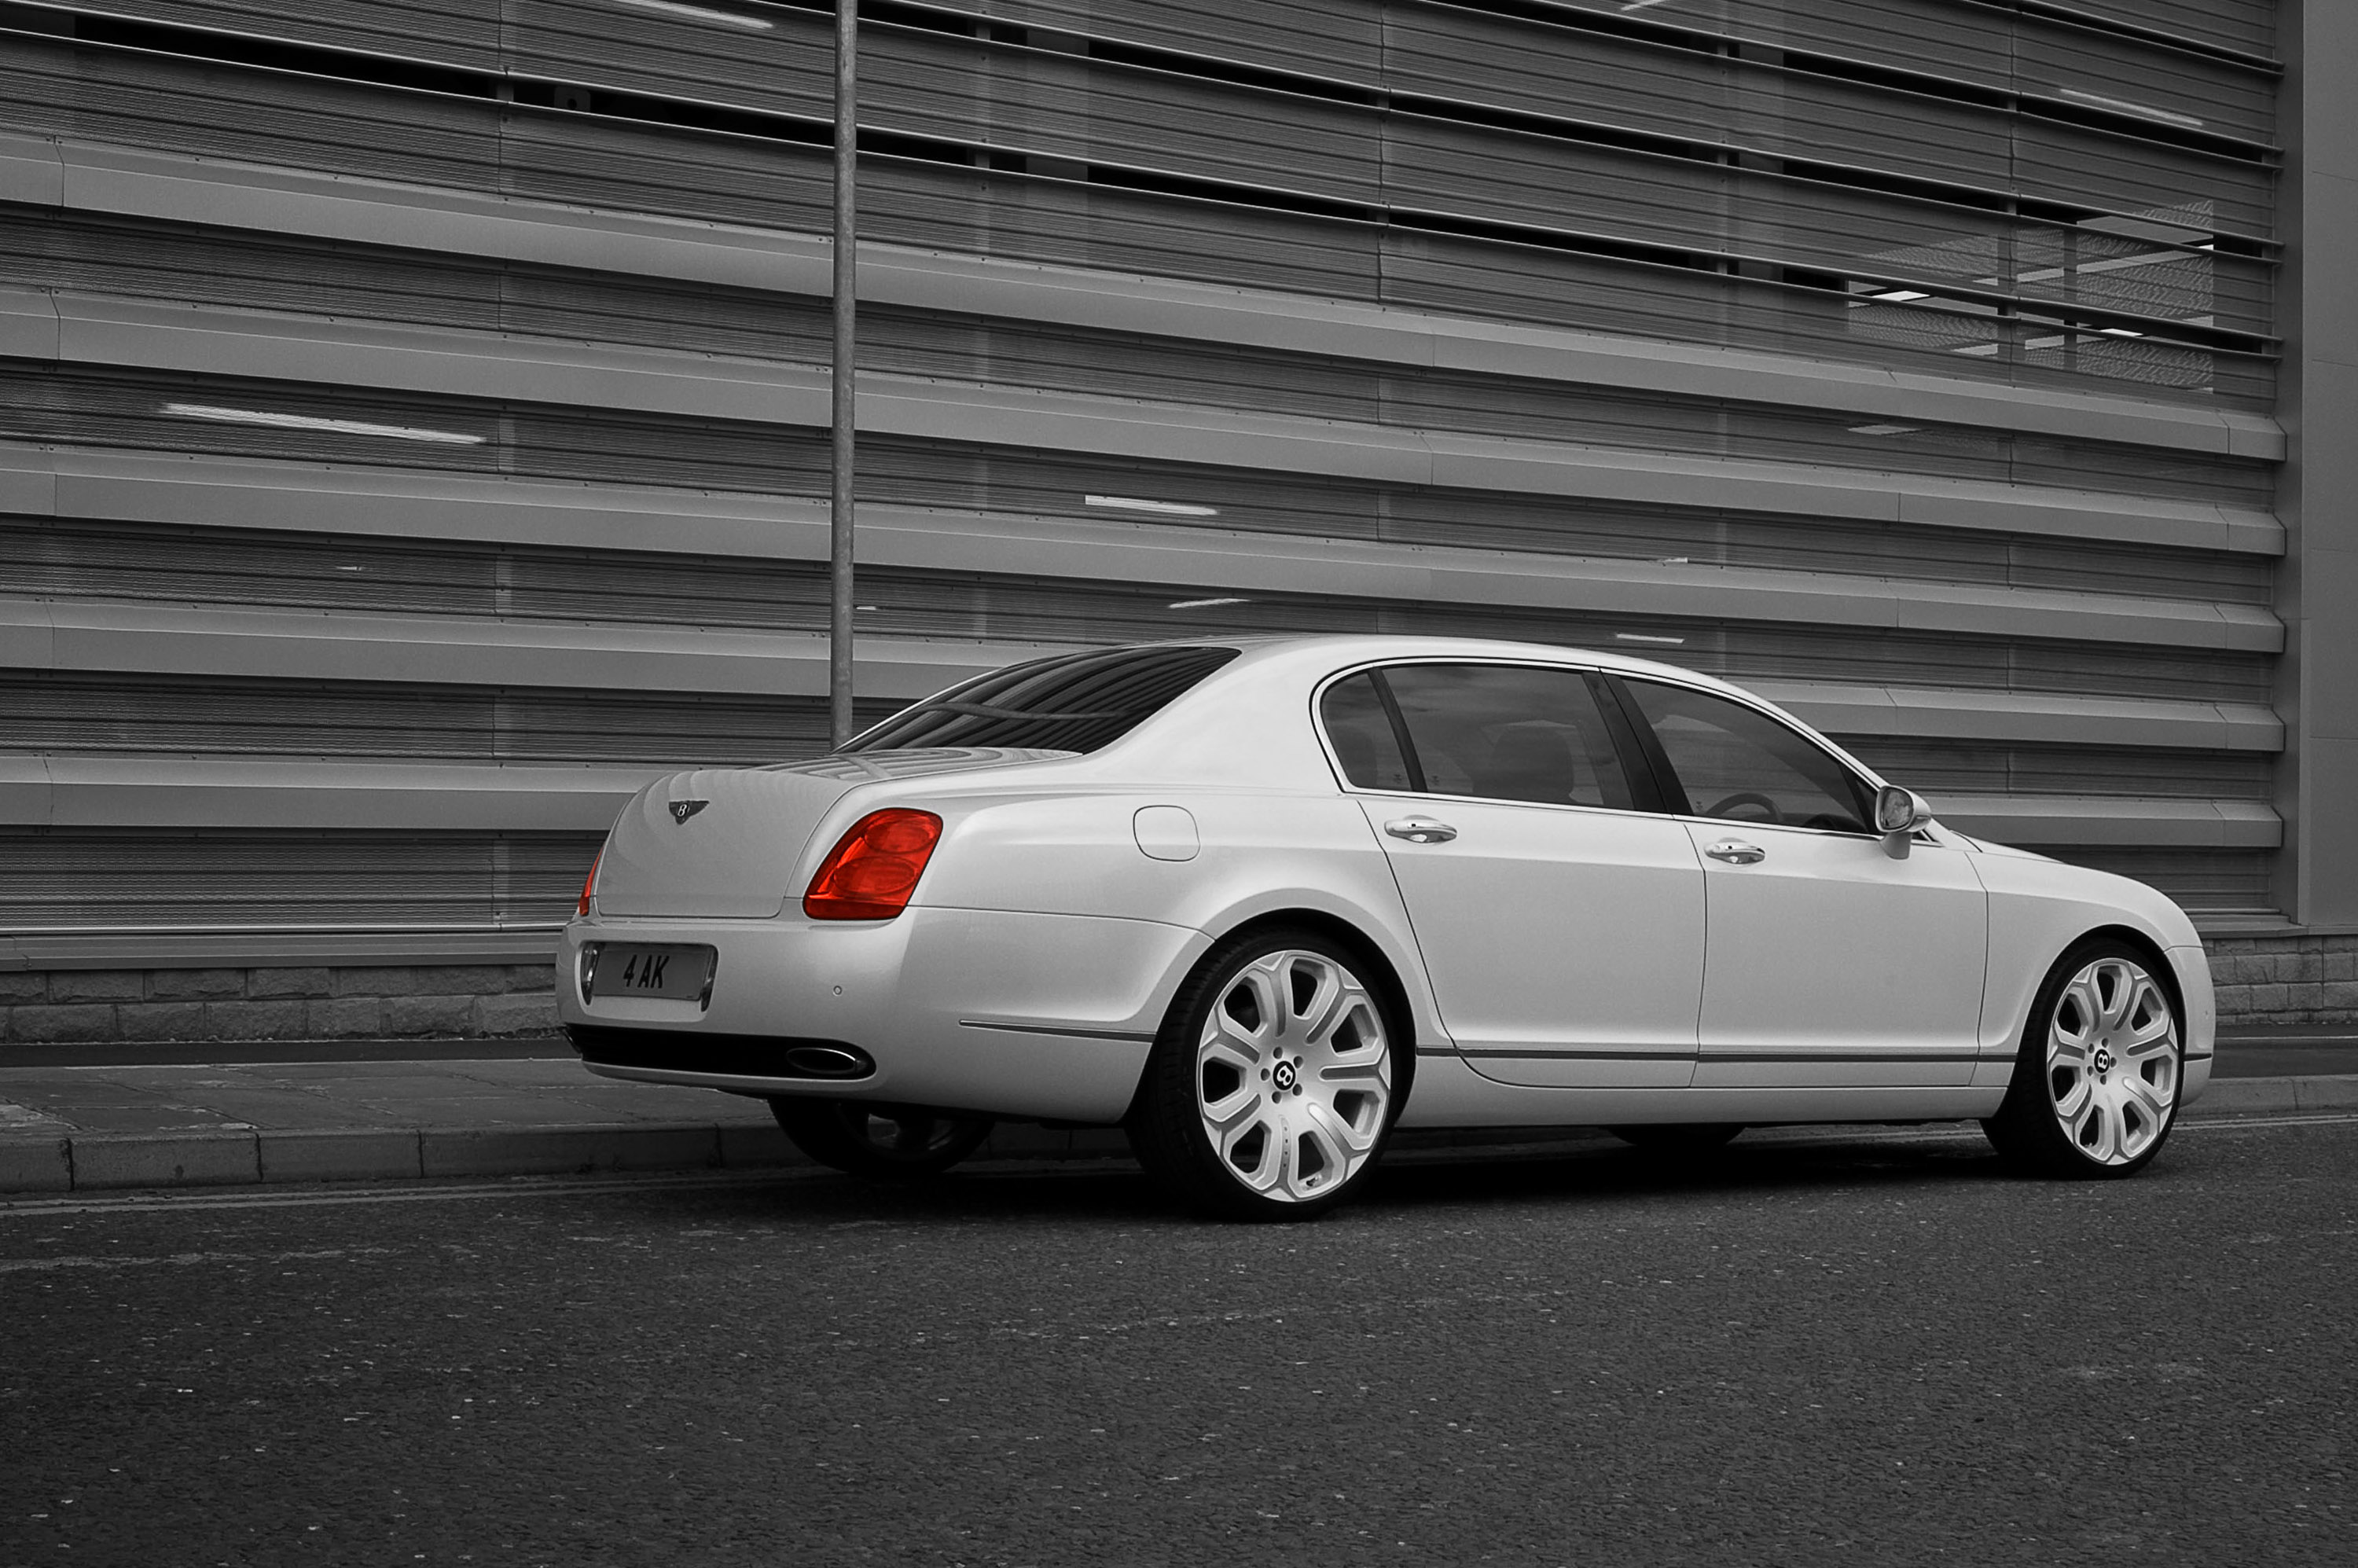 Project Kahn Pearl White Bentley Flying Spur